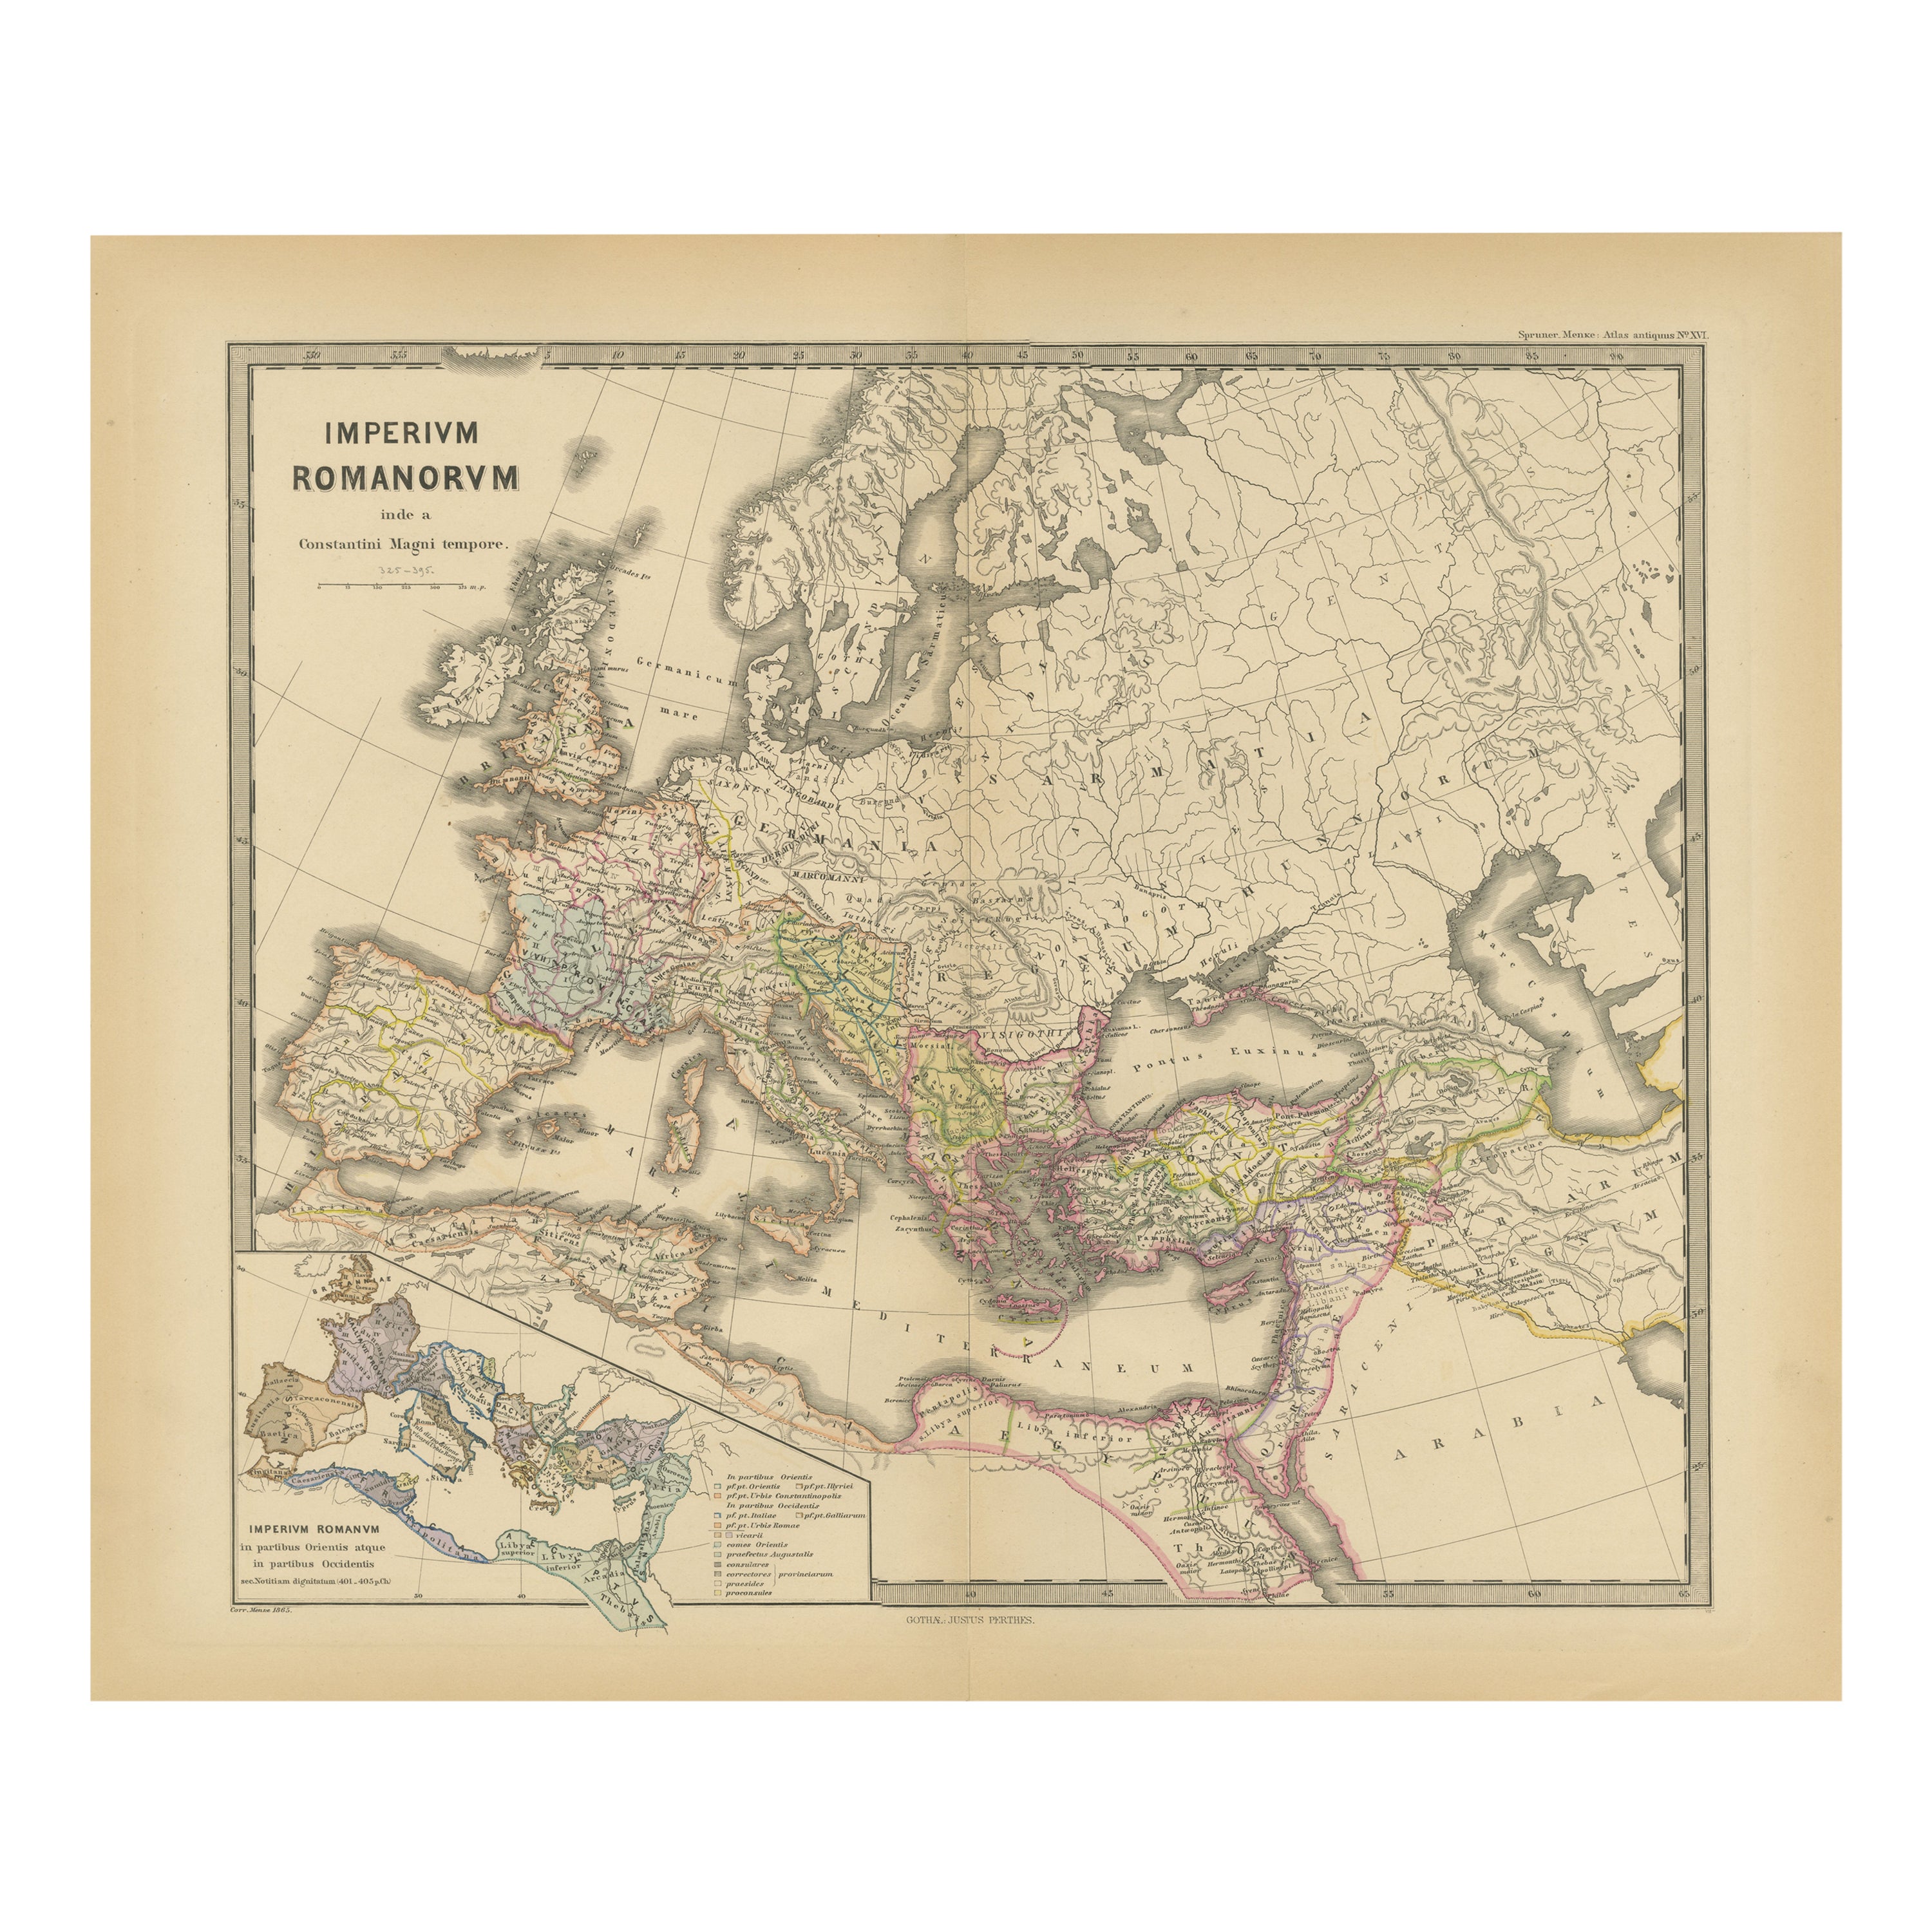 Old Map of Mediterranean Powers: Pompey to Actium (66-31 BC), Published in 1880  For Sale